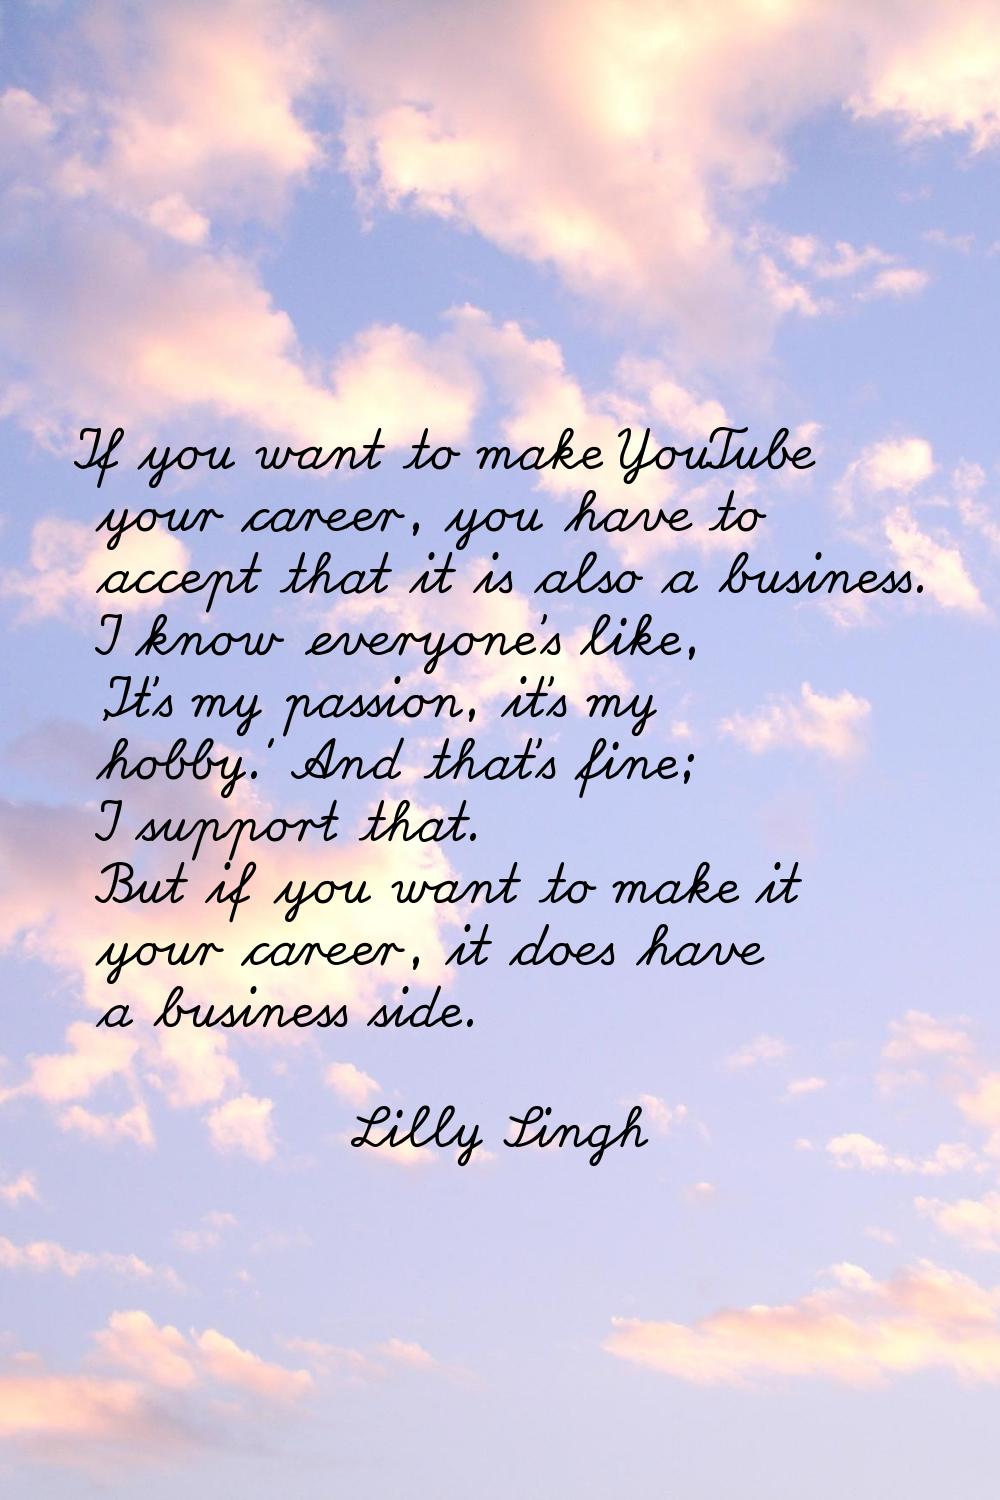 If you want to make YouTube your career, you have to accept that it is also a business. I know ever